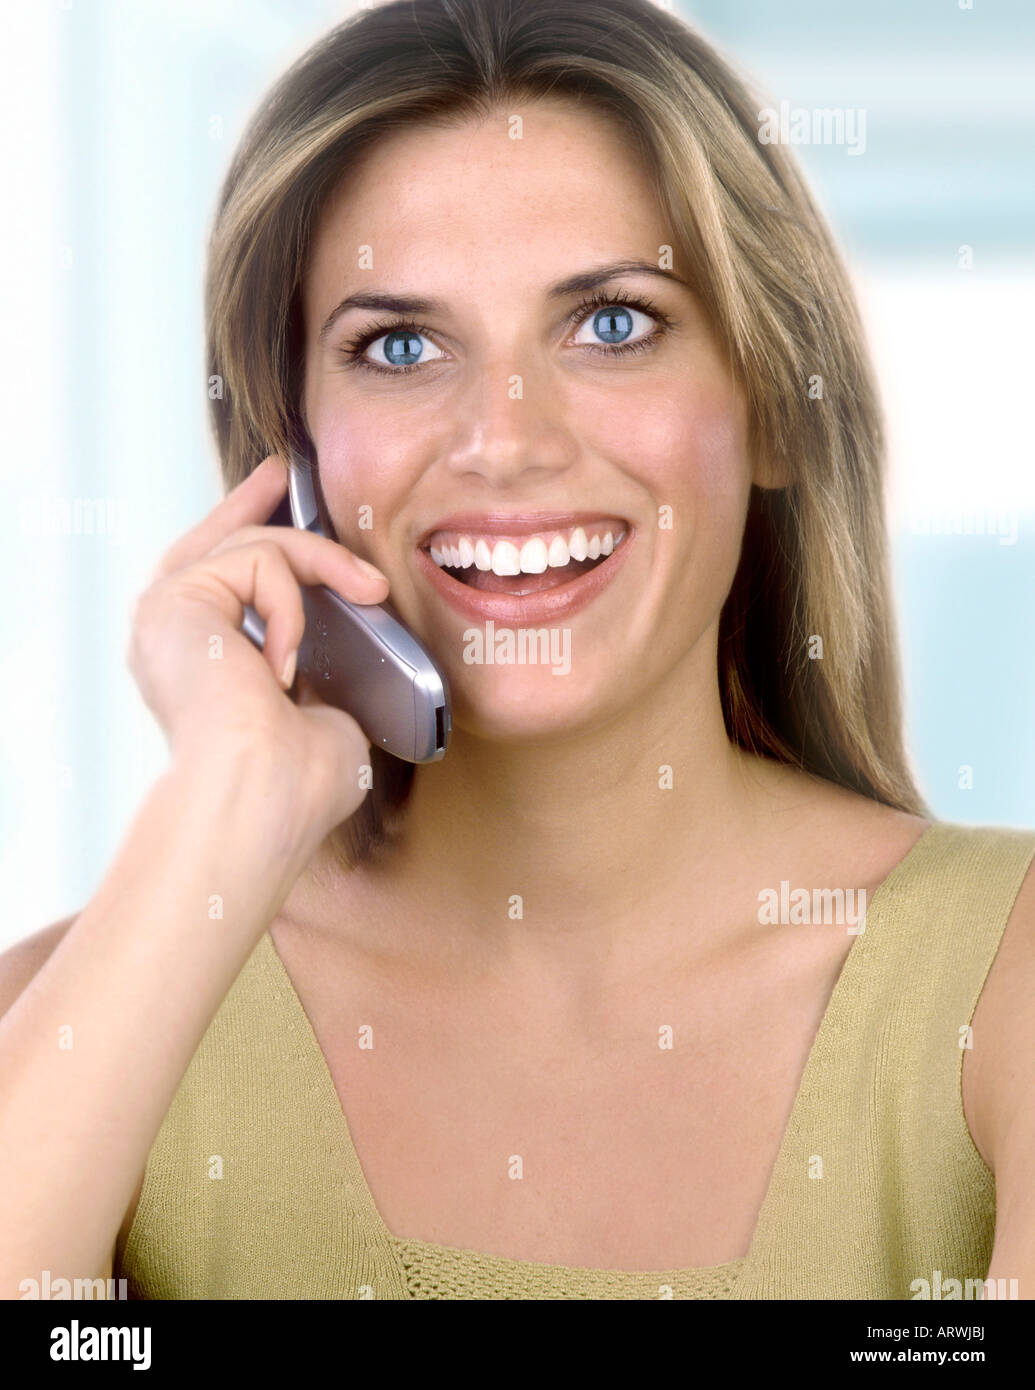 Smiling Woman talking on cell phone Banque D'Images